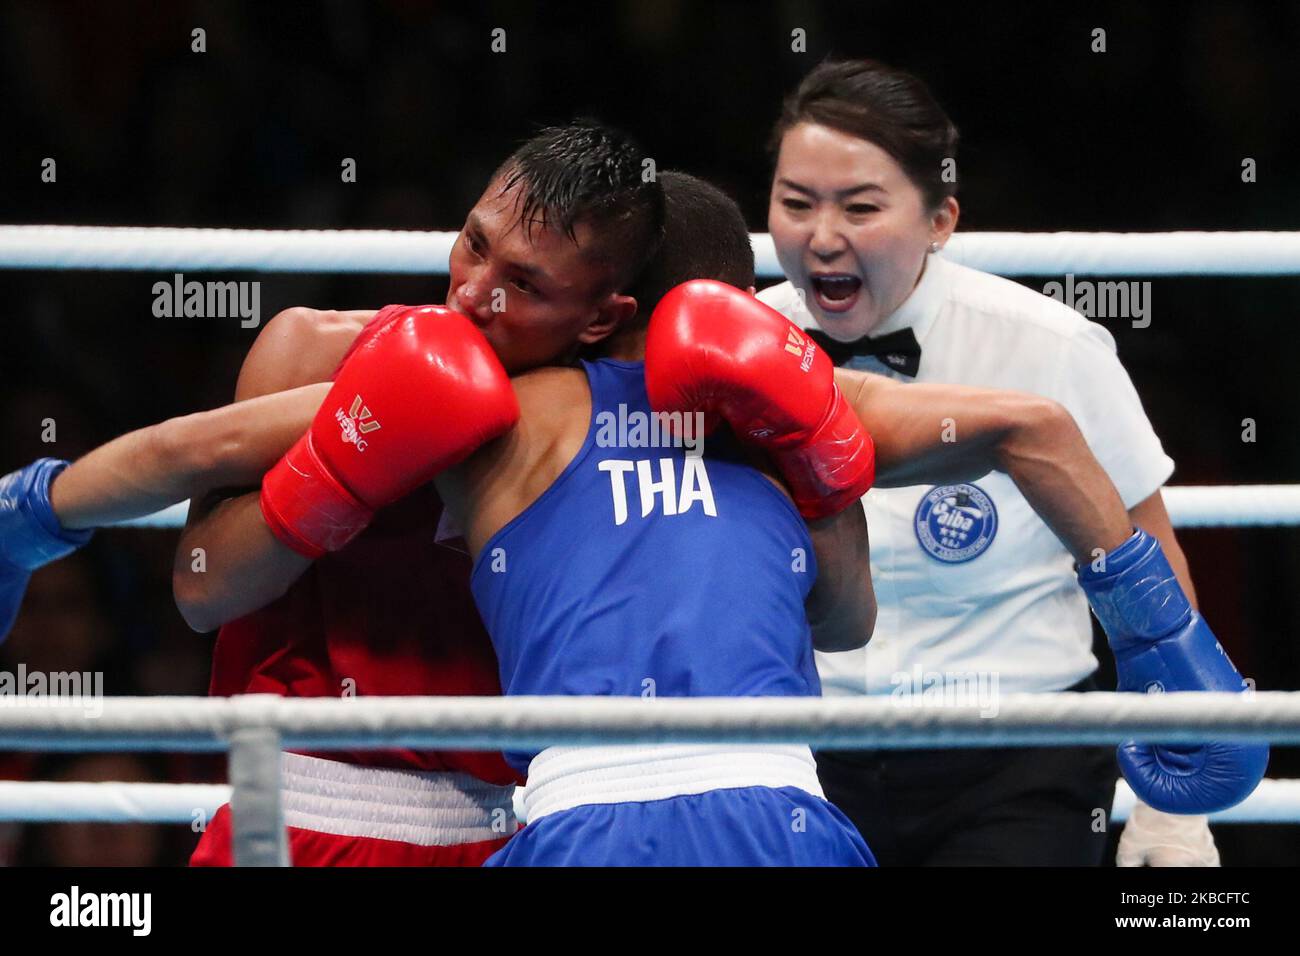 Rogen Ladon of the Philippines emerges victorious against Ammarit Yaodam of Thailand to win the gold medal in Men's Boxing flyweight division for the 30th South East Asian Games held in Manila on December 9, 2019. (Photo by George Calvelo/NurPhoto) Stock Photo